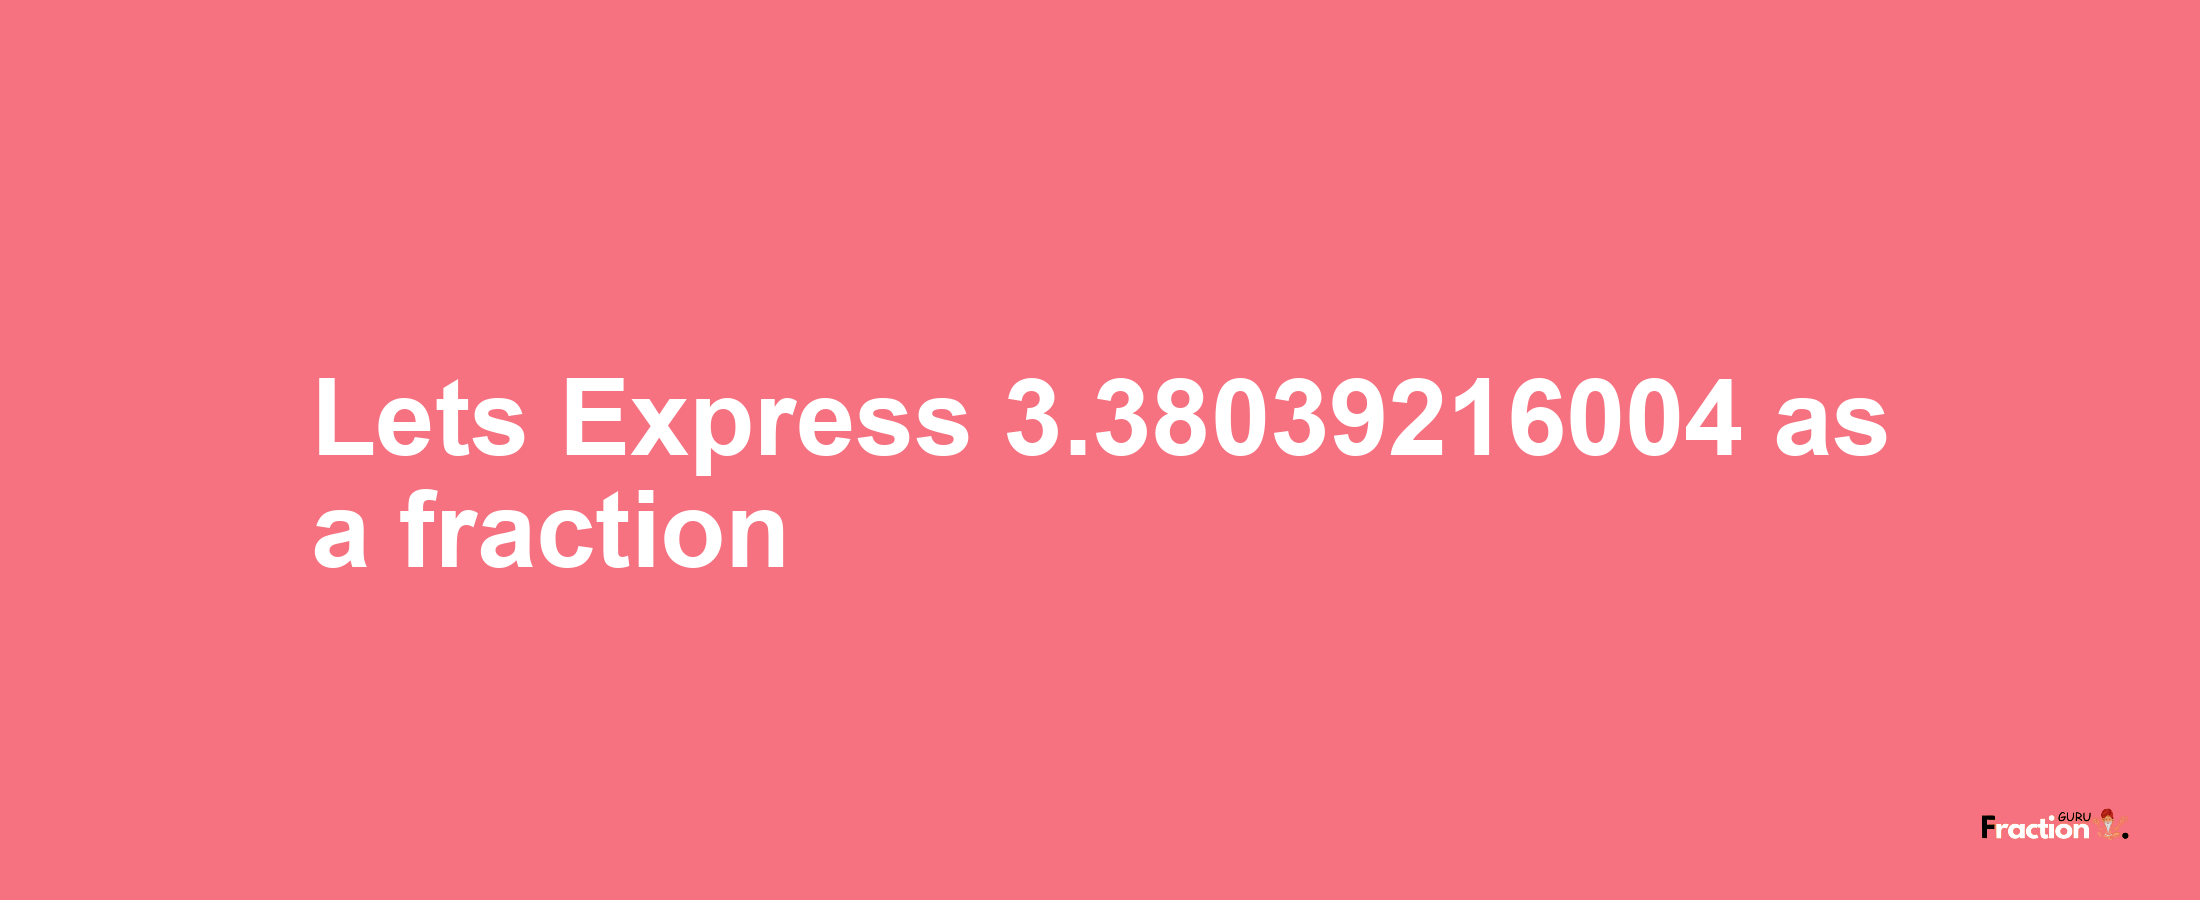 Lets Express 3.38039216004 as afraction